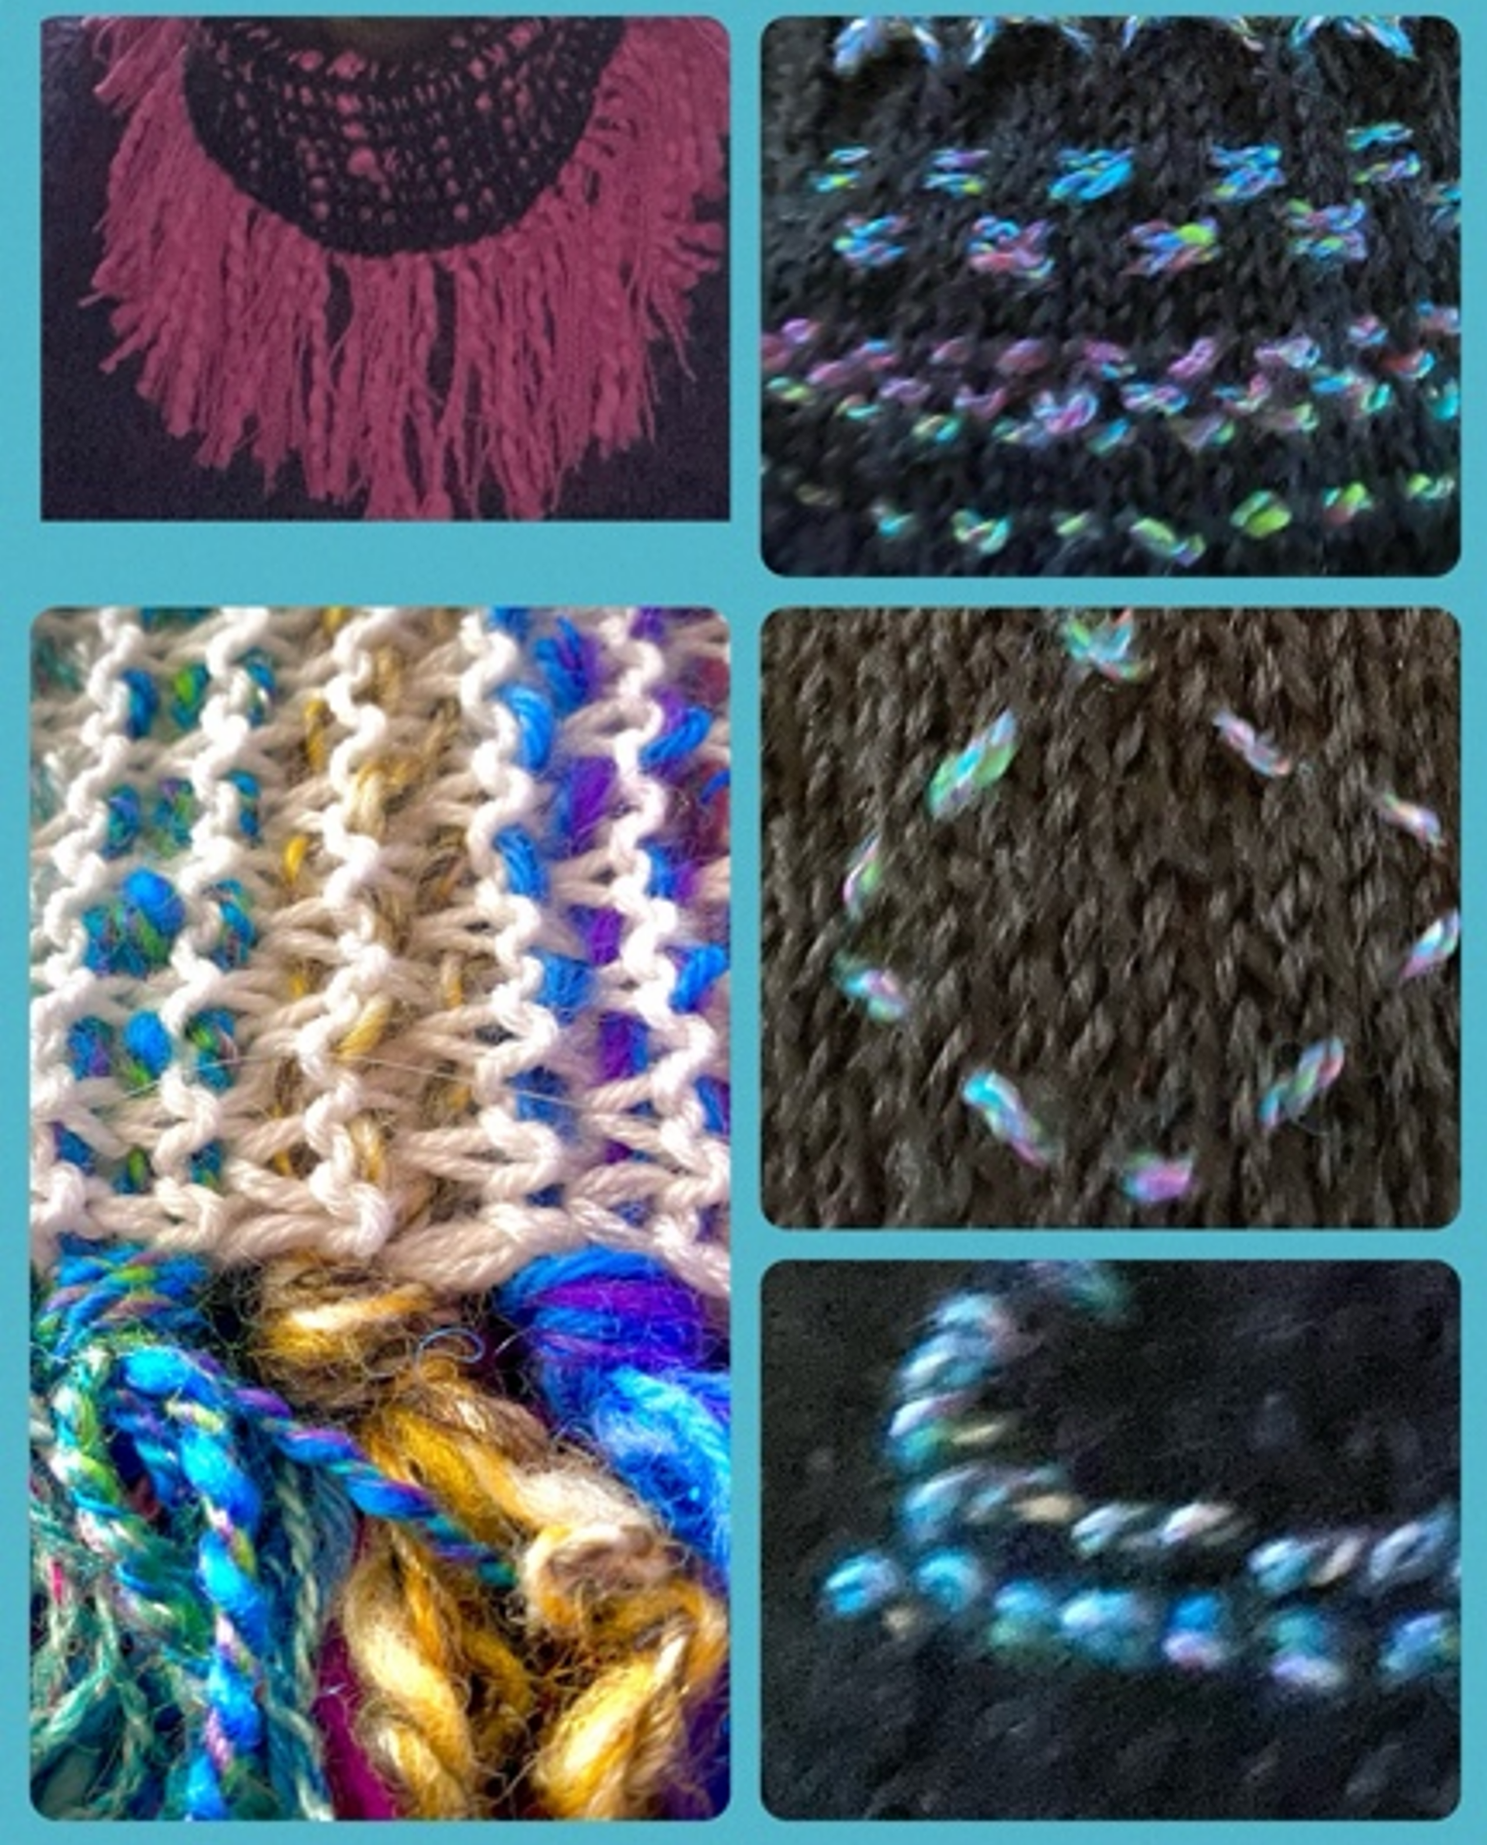 Examples of knit-weave applied to hand knitting.